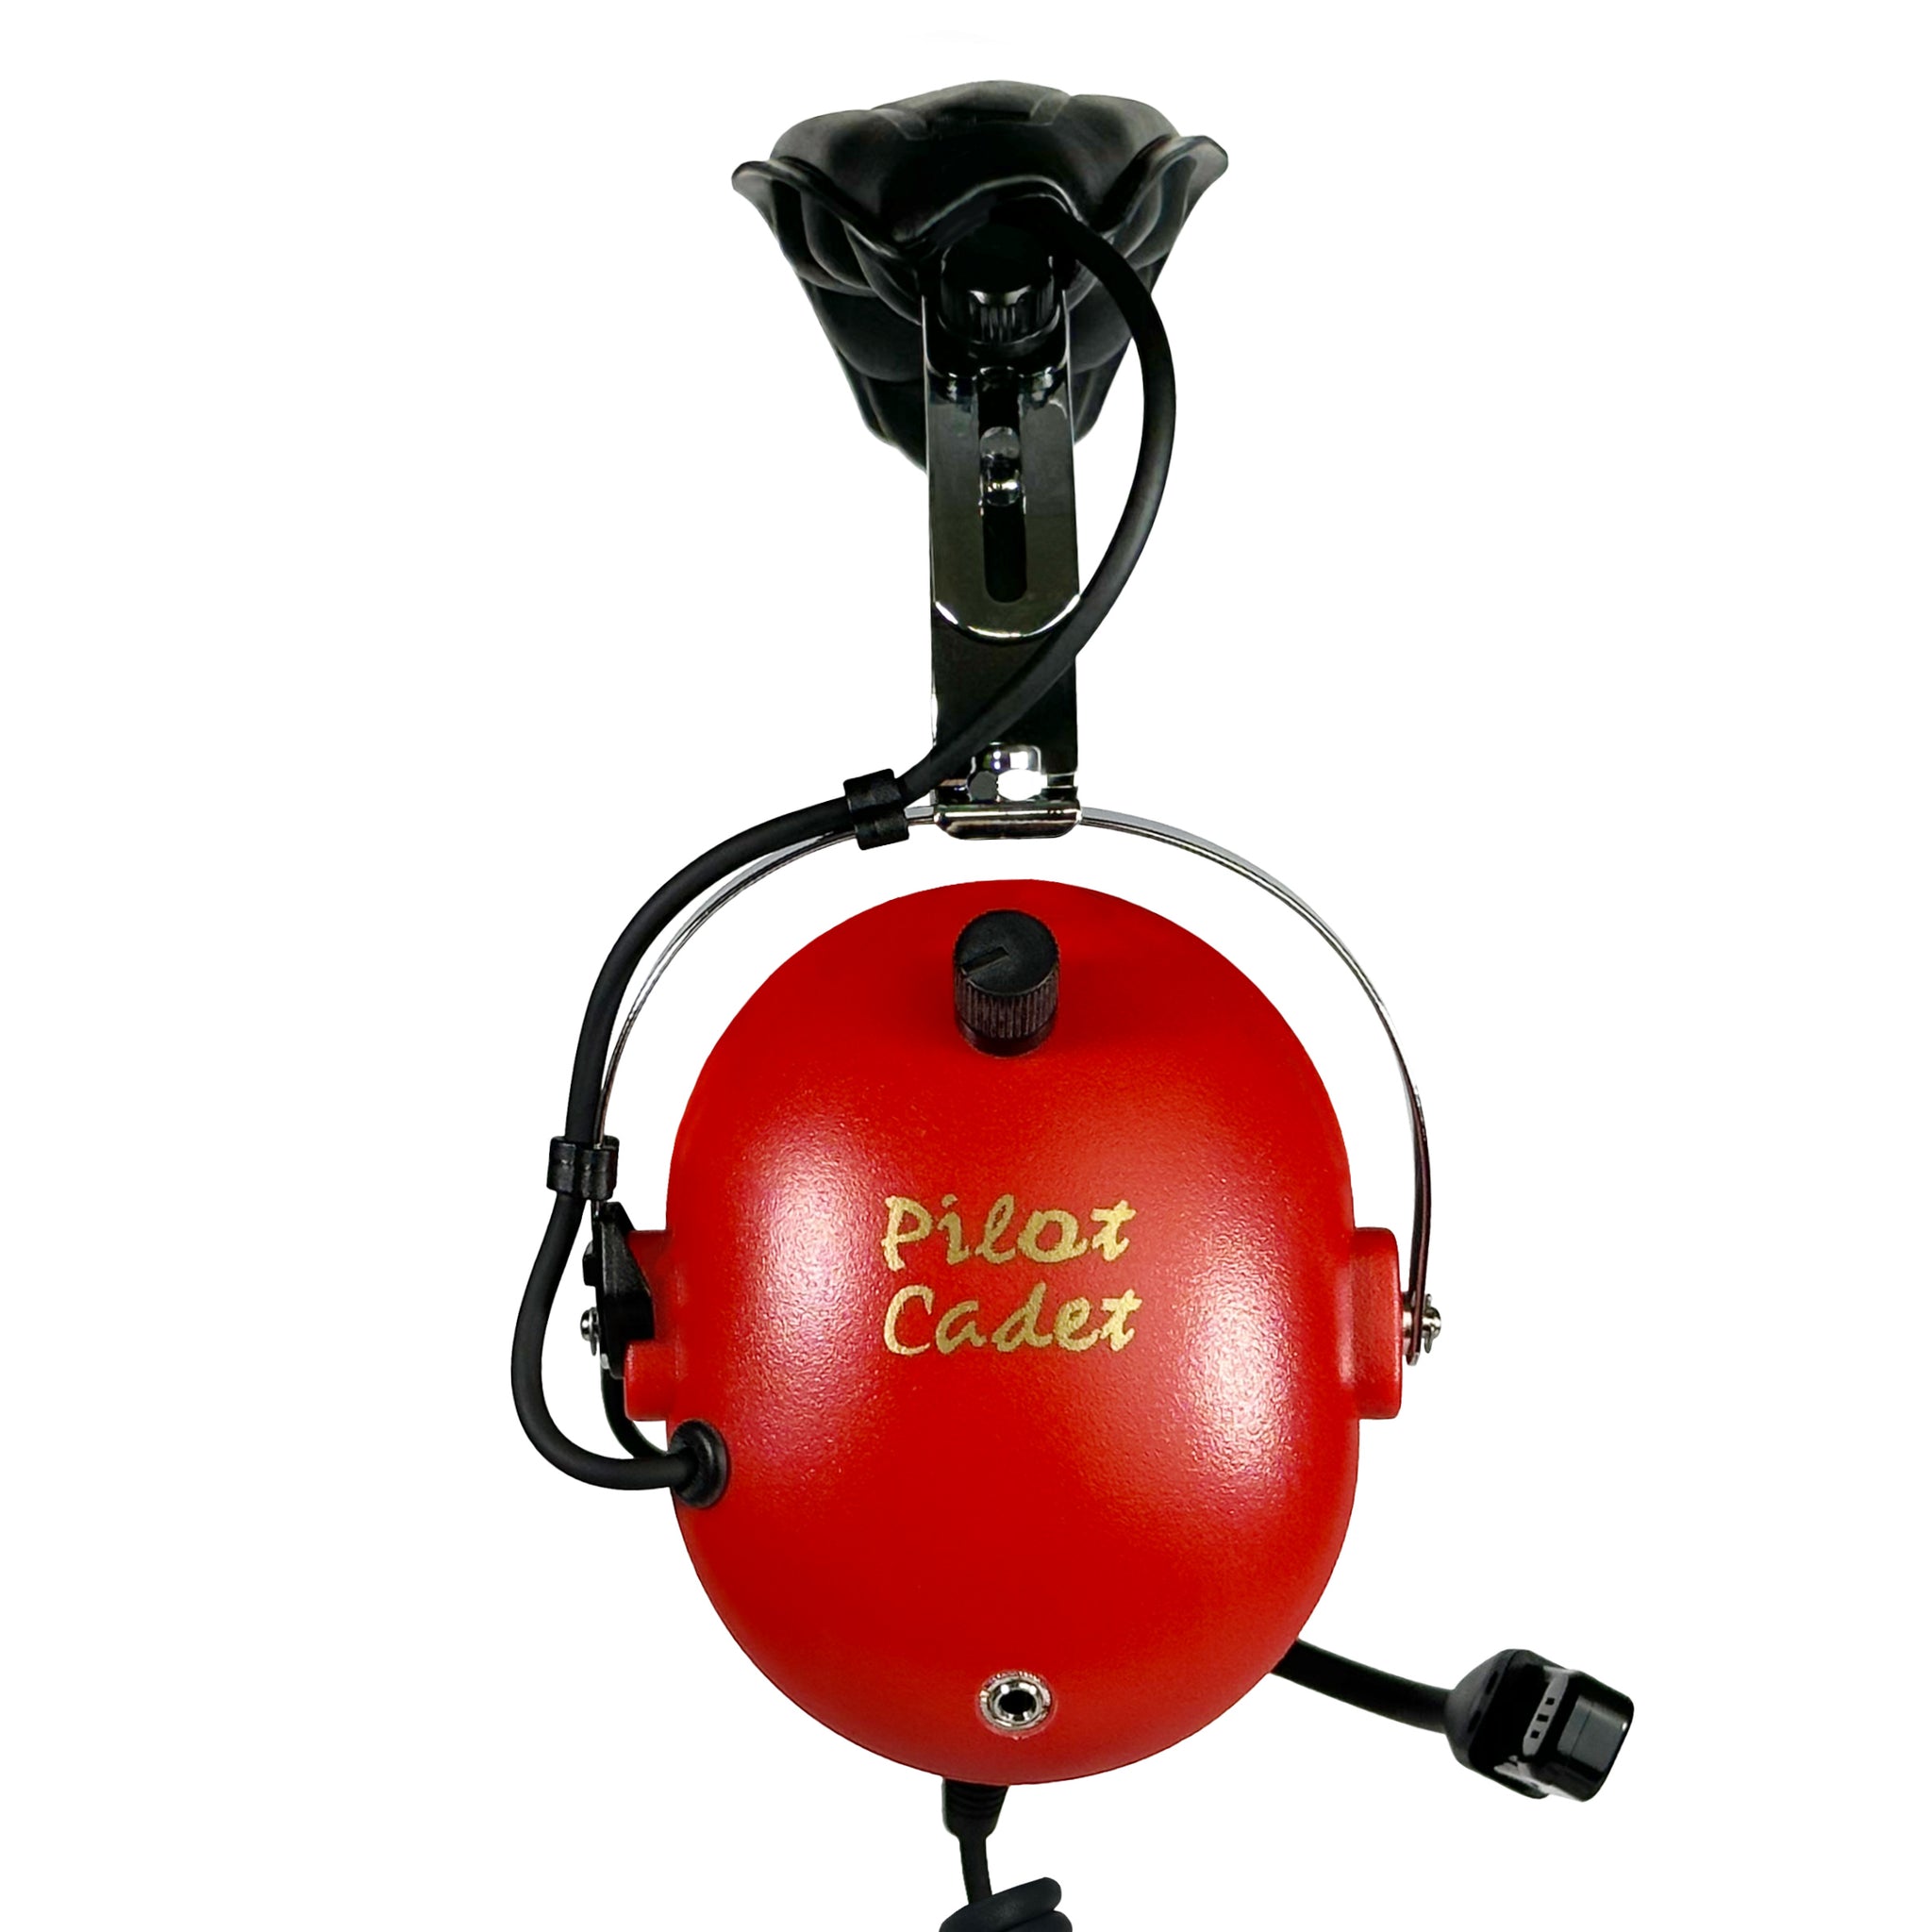 PA-51CH Child’s Helicopter Headset